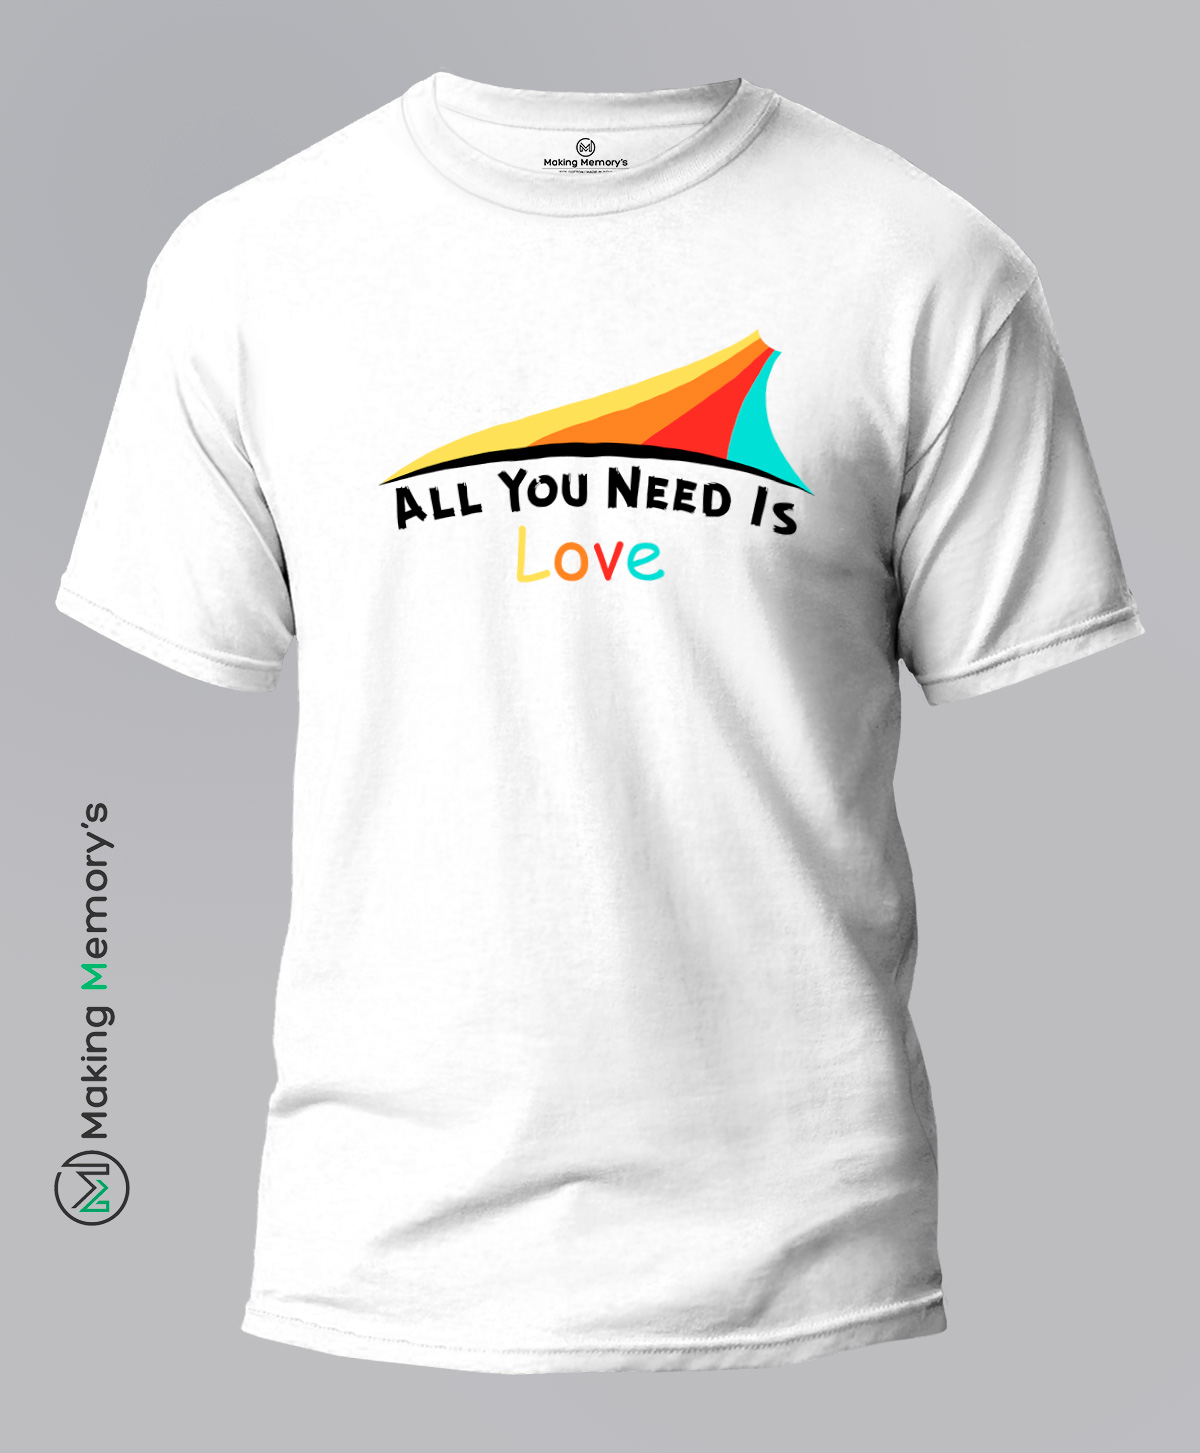 All-You-Need-Is-Love-White-T-Shirt